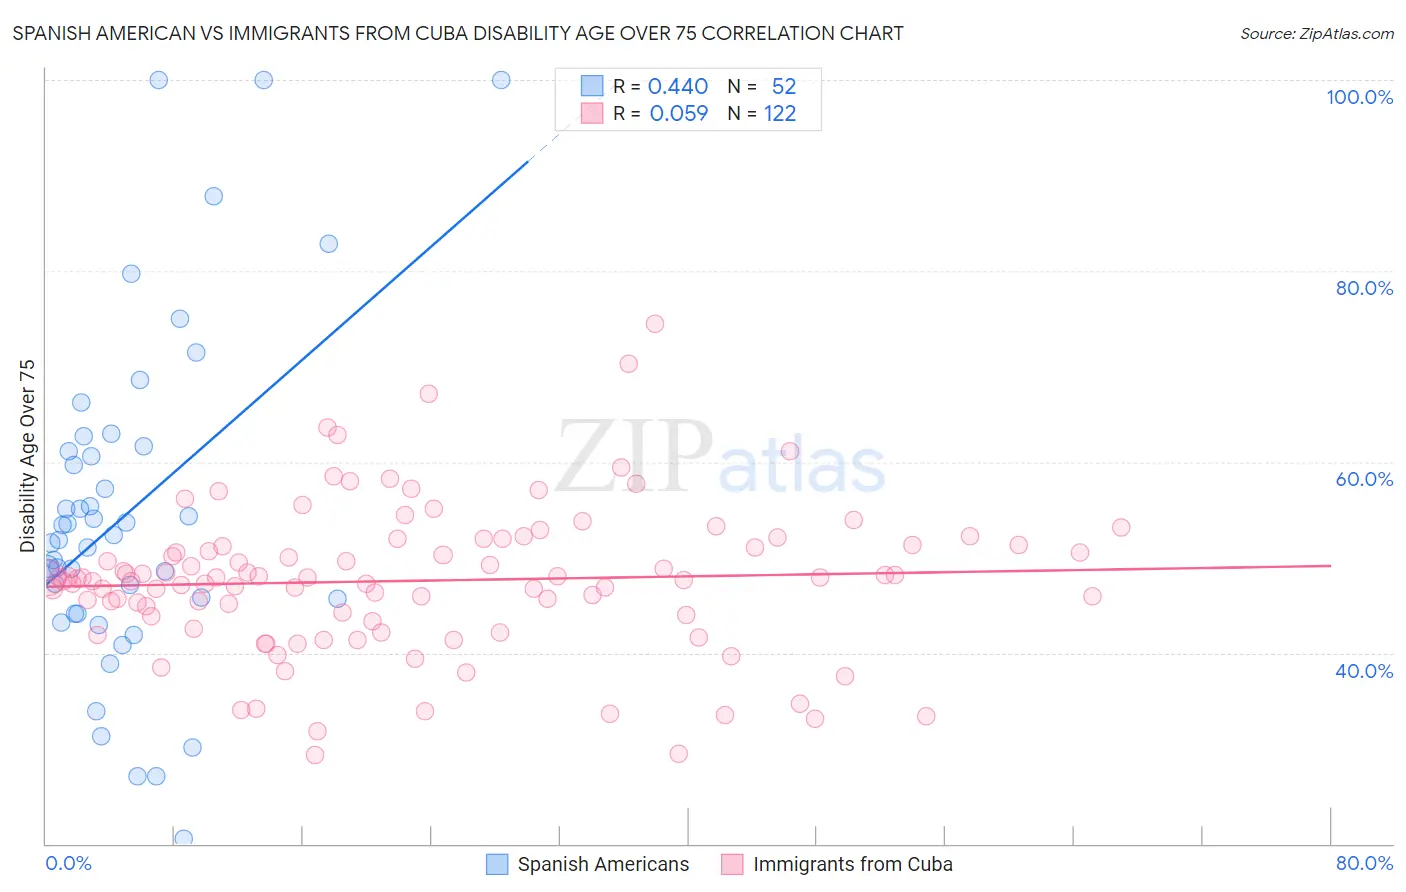 Spanish American vs Immigrants from Cuba Disability Age Over 75